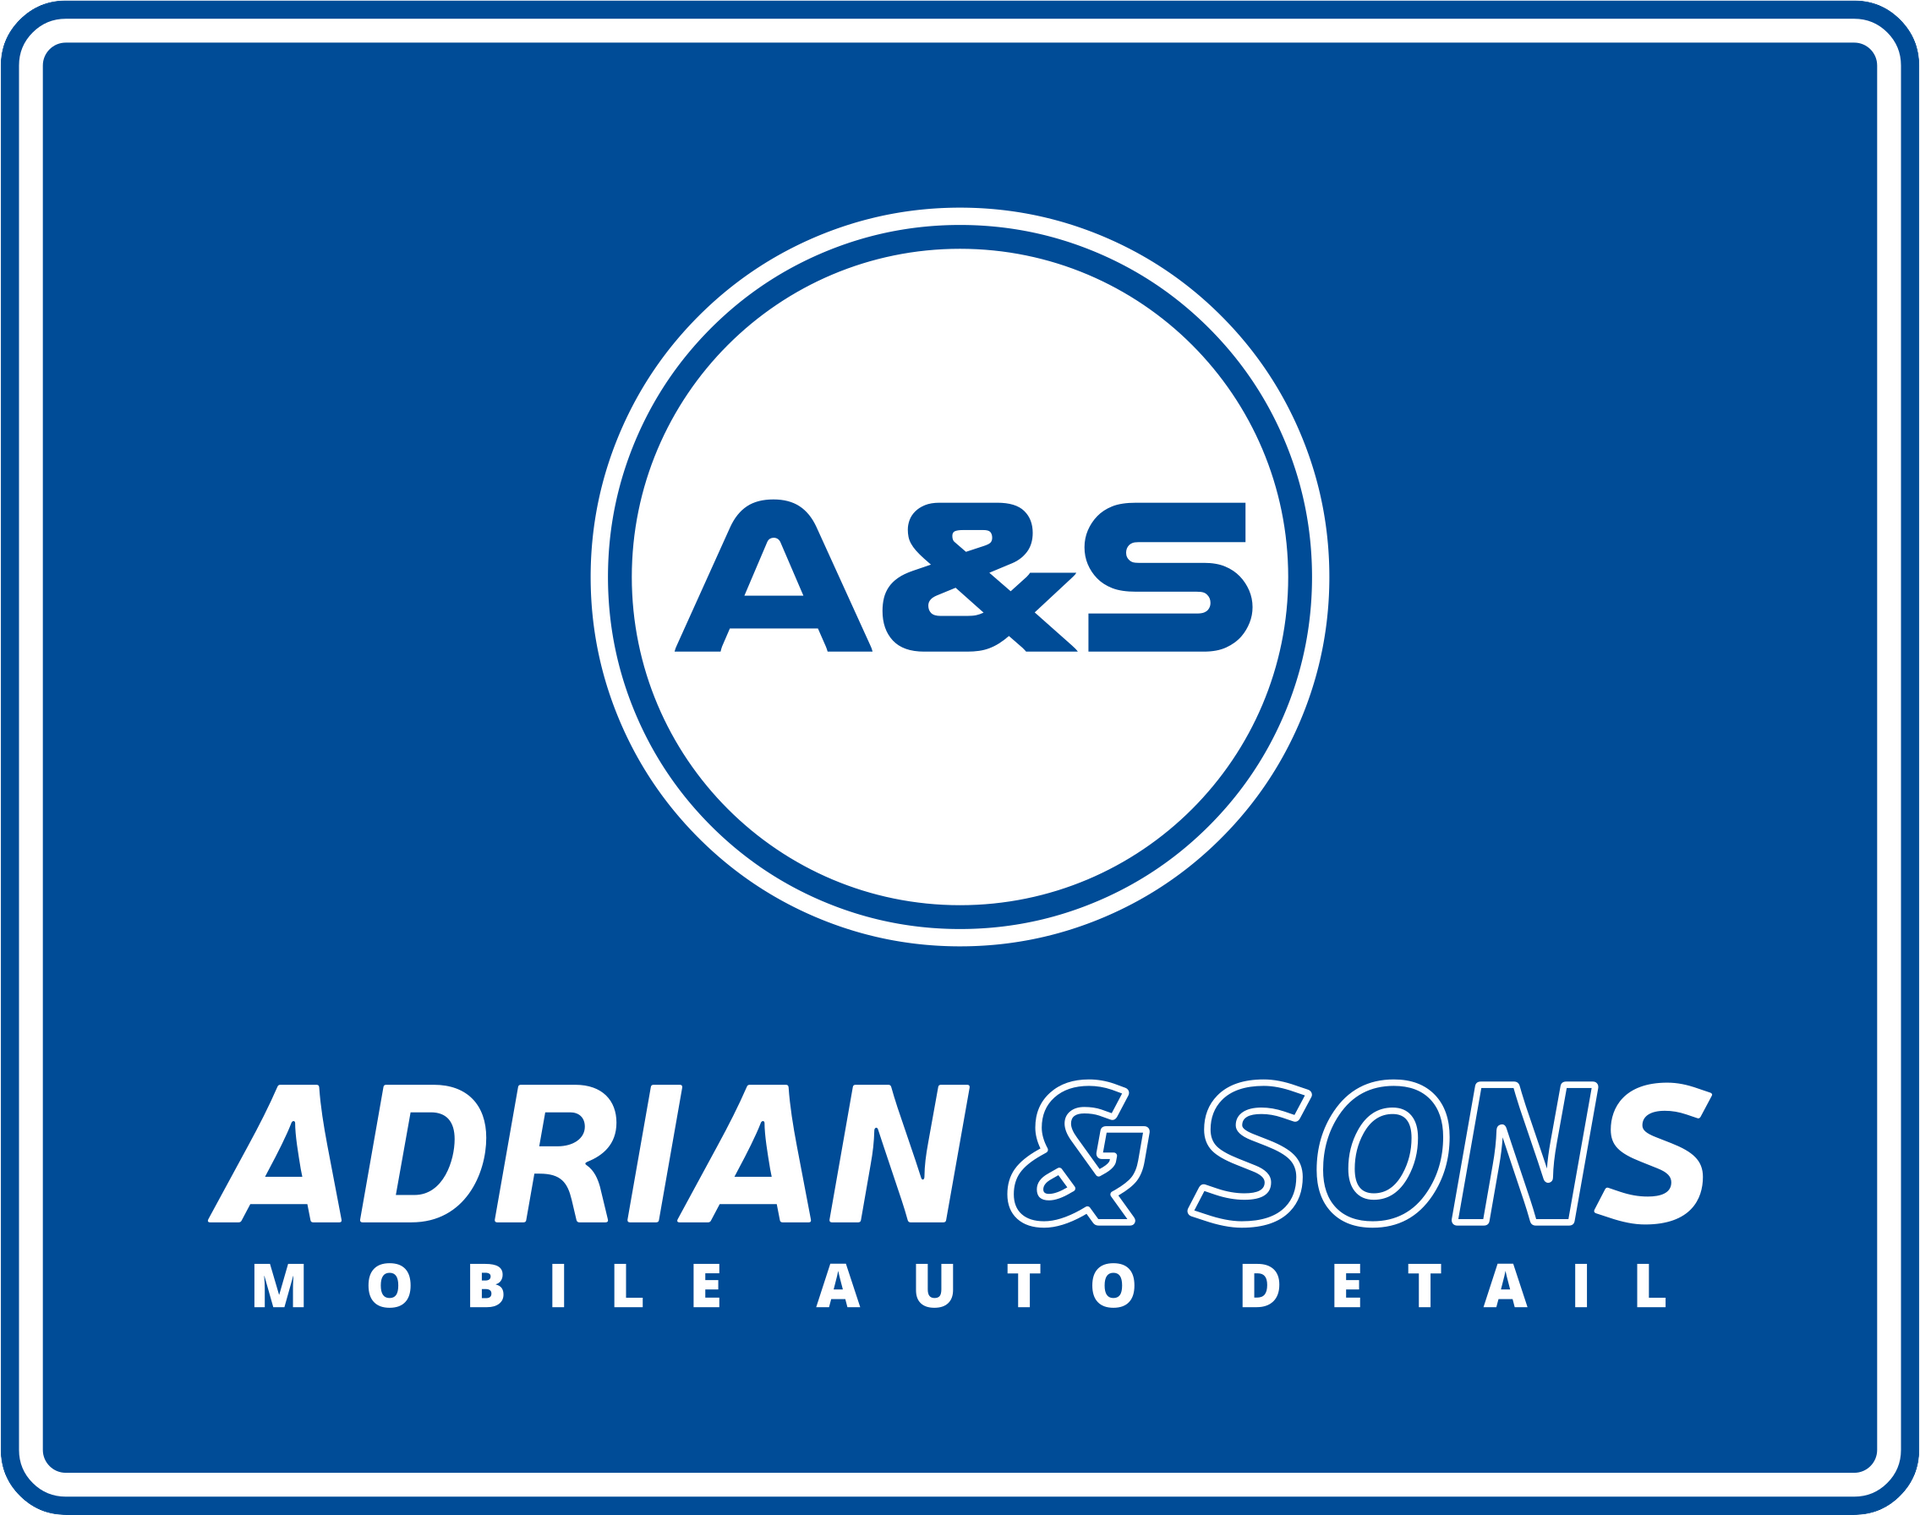 Adrian & Sons Mobile Auto Detail